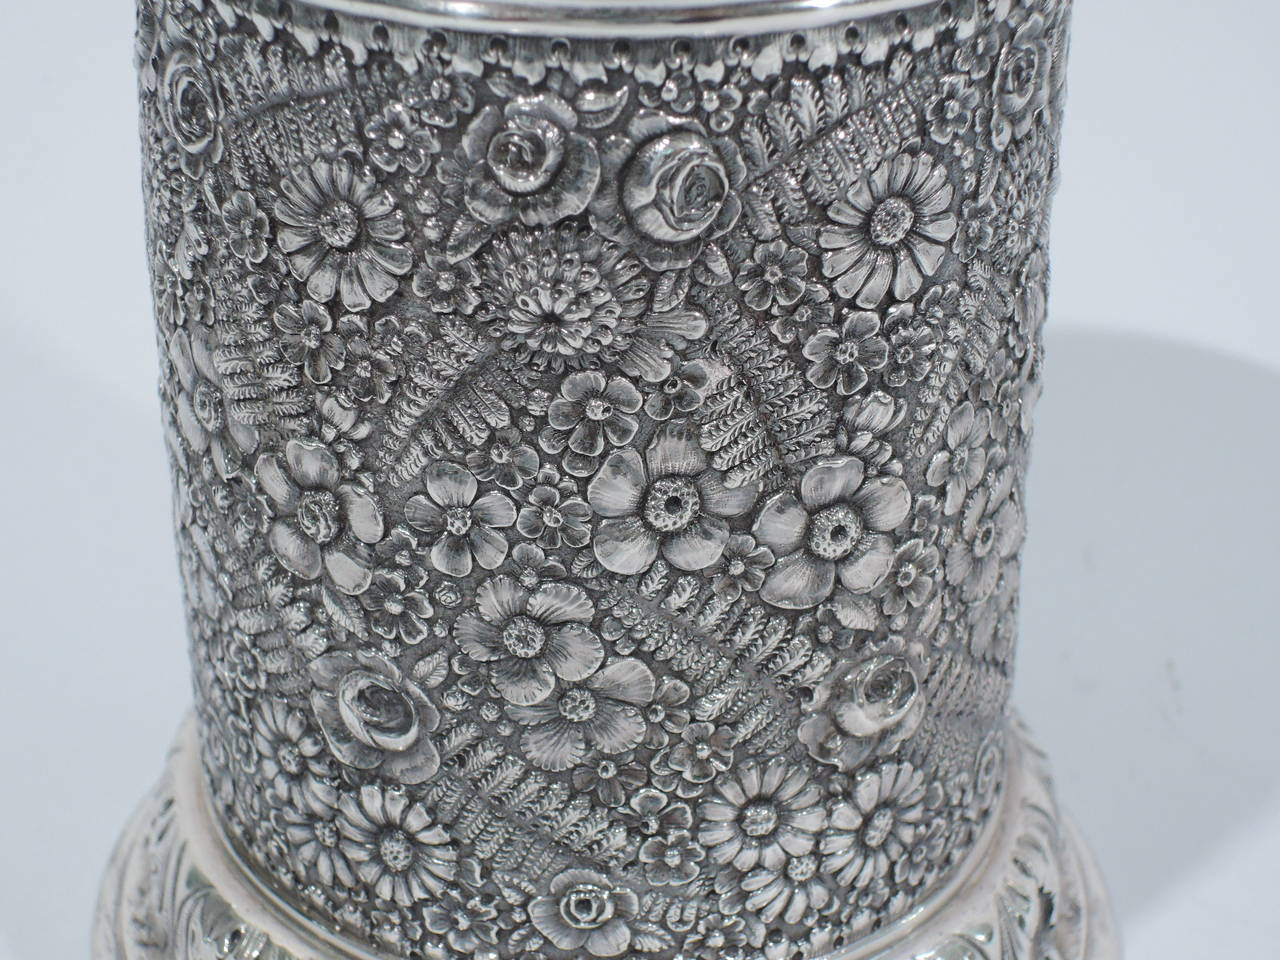 Unusual Sterling Silver Shaker with Floral Repousse by Tiffany  2